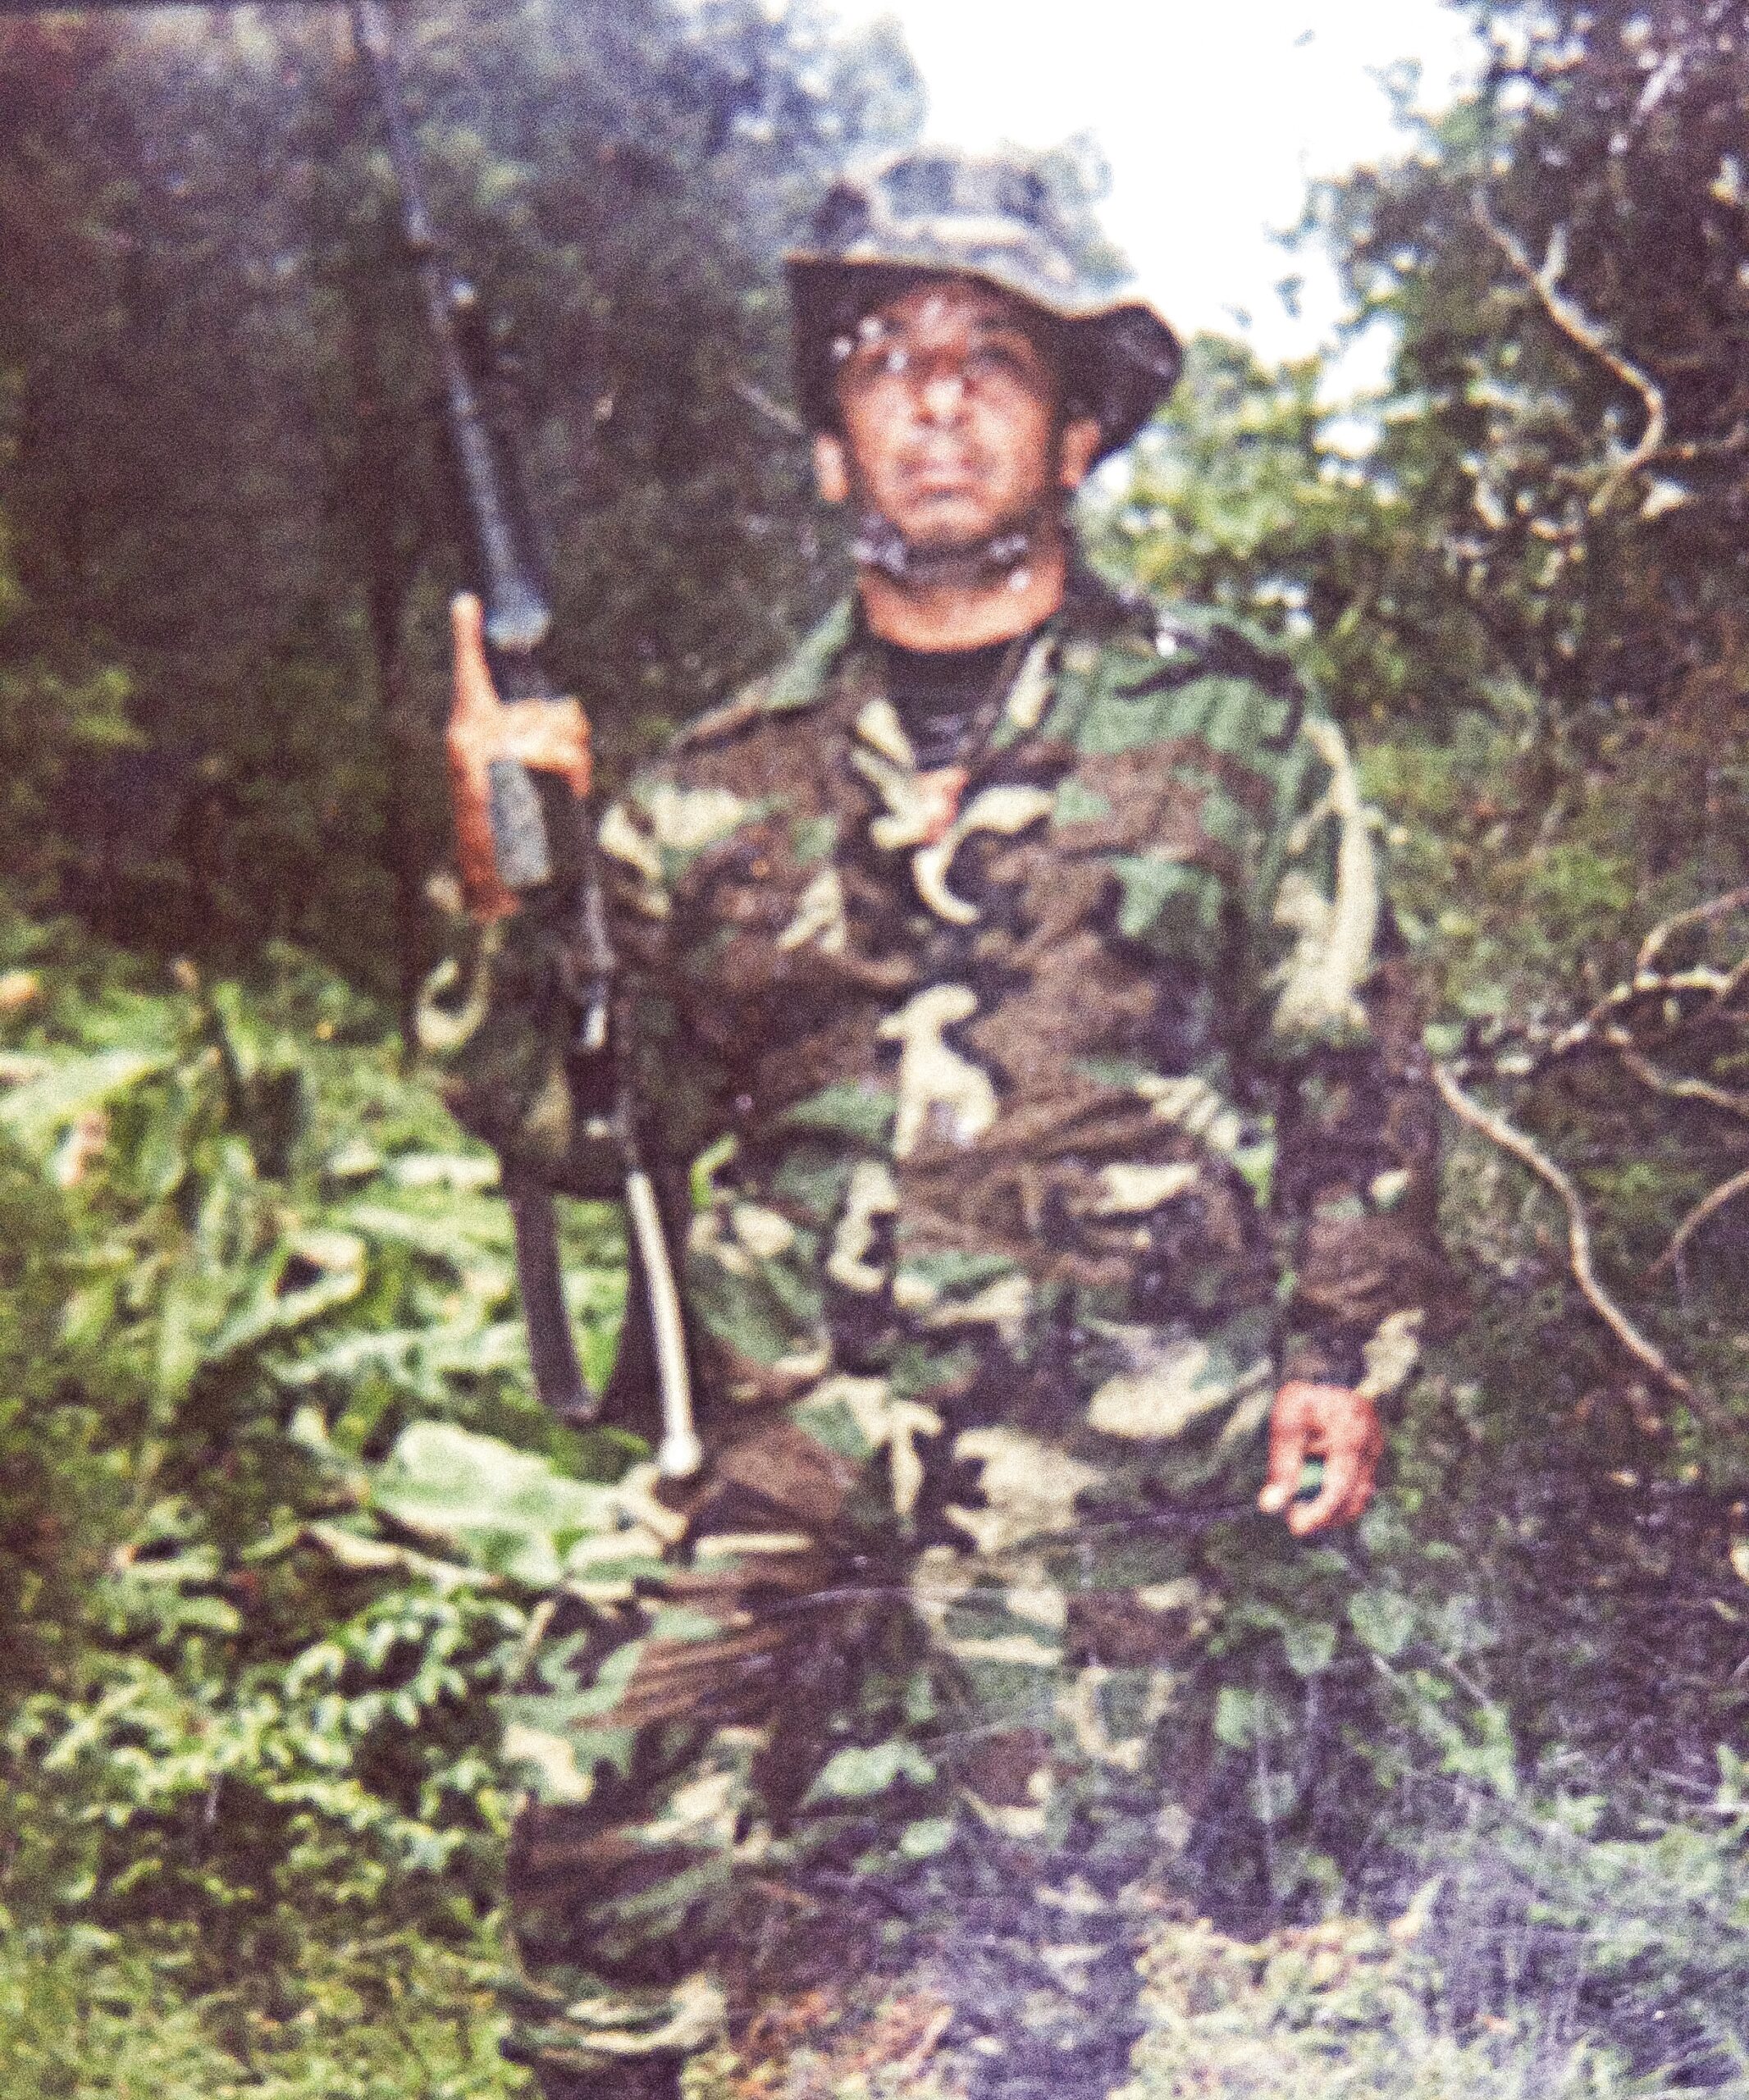 Man in Colombia dressed in Guerilla clothing